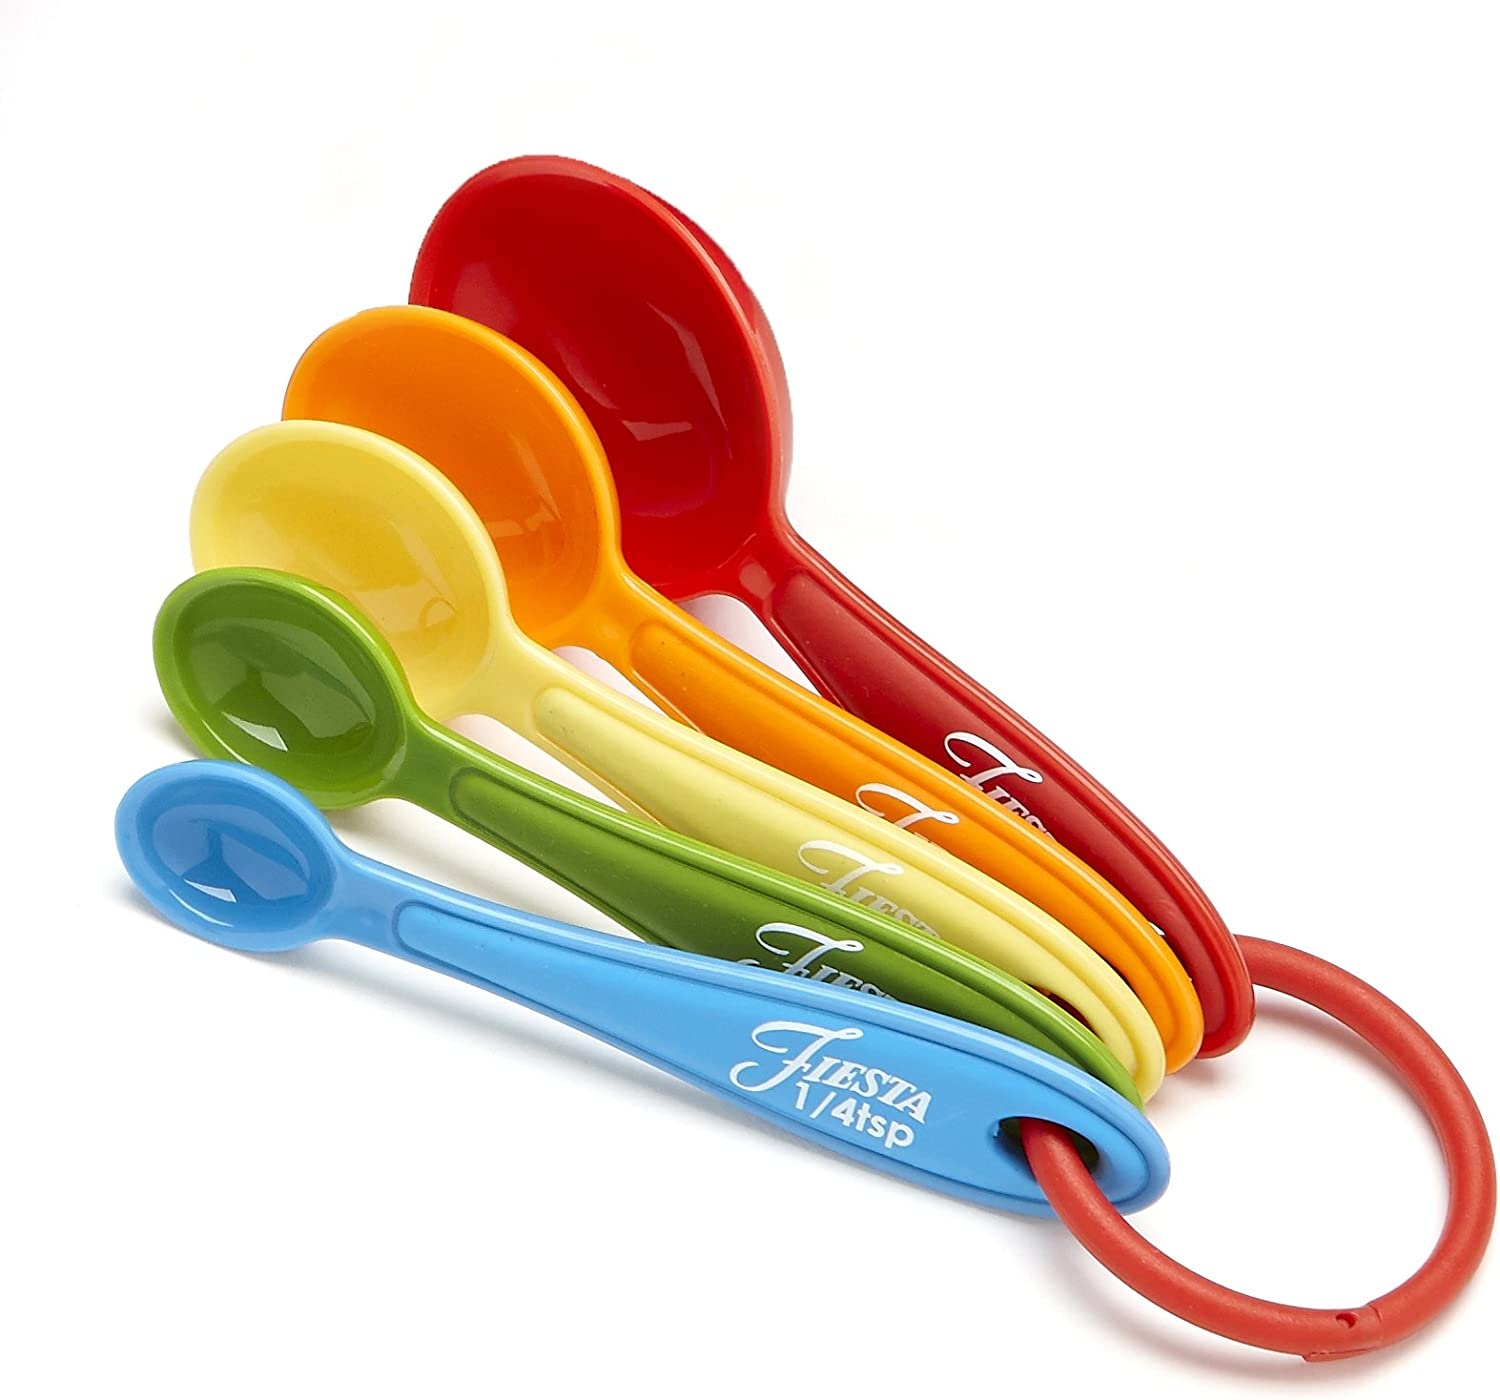 Fiesta 5-Piece Measuring Spoon Set Import To Shop ×Product customization General Description Gallery Reviews Variations